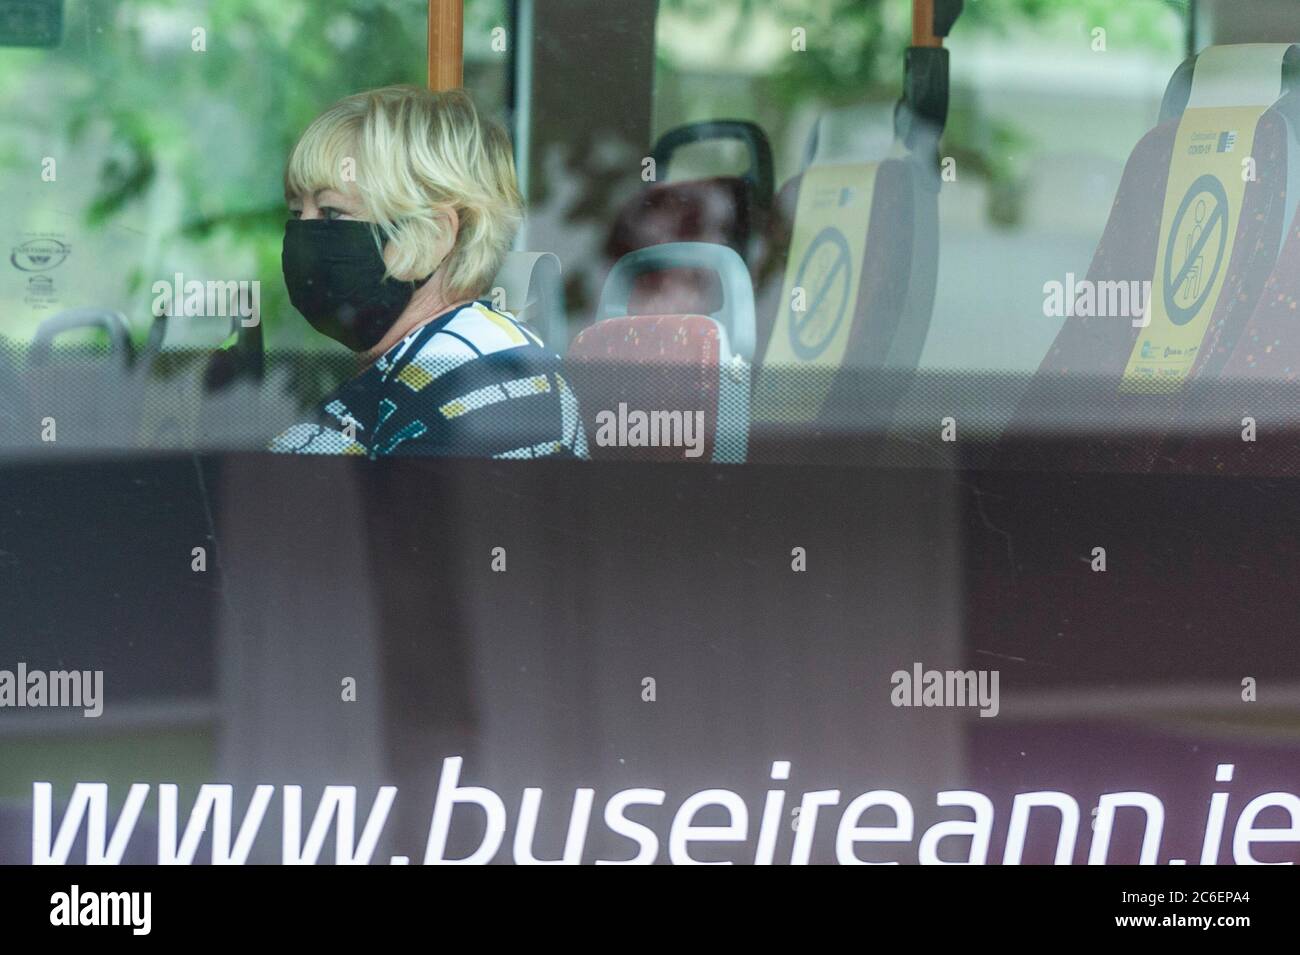 Cork, Ireland. 9th July, 2020. A woman wears a face mask on a Bus Eireann bus in Cork city today. The wearing of face masks on public transport became mandatory in Ireland on Monday 29th June. Credit: AG News/Alamy Live News Stock Photo